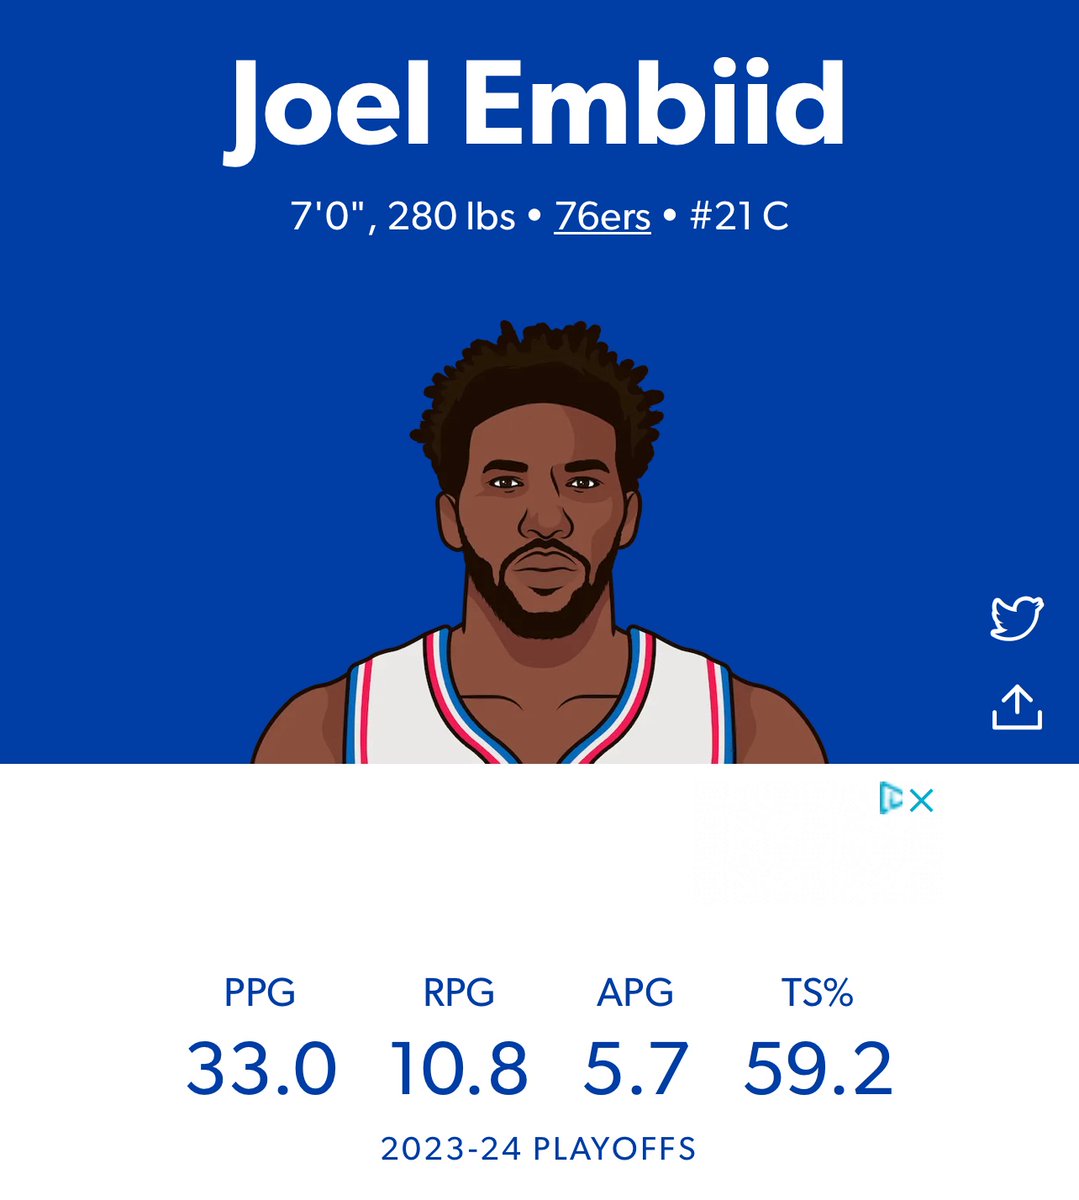 Bell’s Palsy
Migraines 
Knee hanging on for dear life

Salute 🤍 @JoelEmbiid